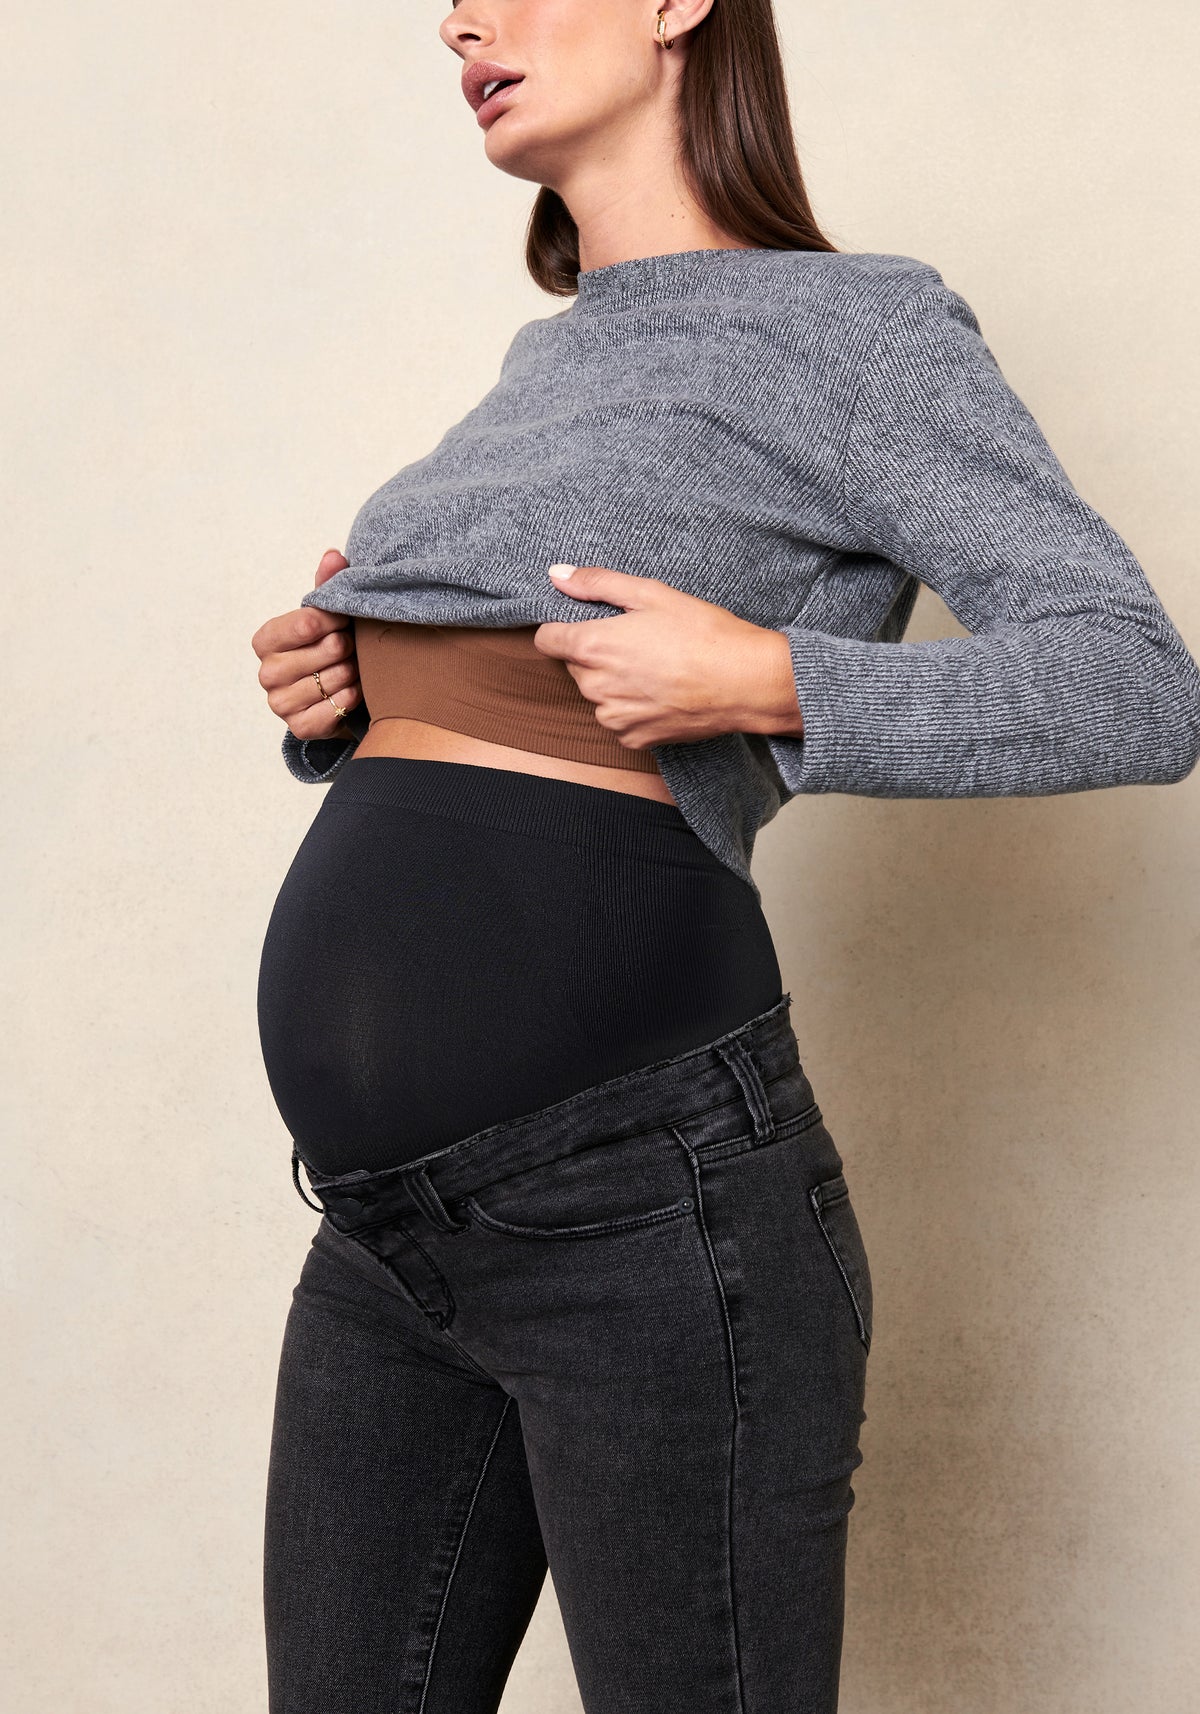 The Unbearable Tragedy of Postpartum Jeans